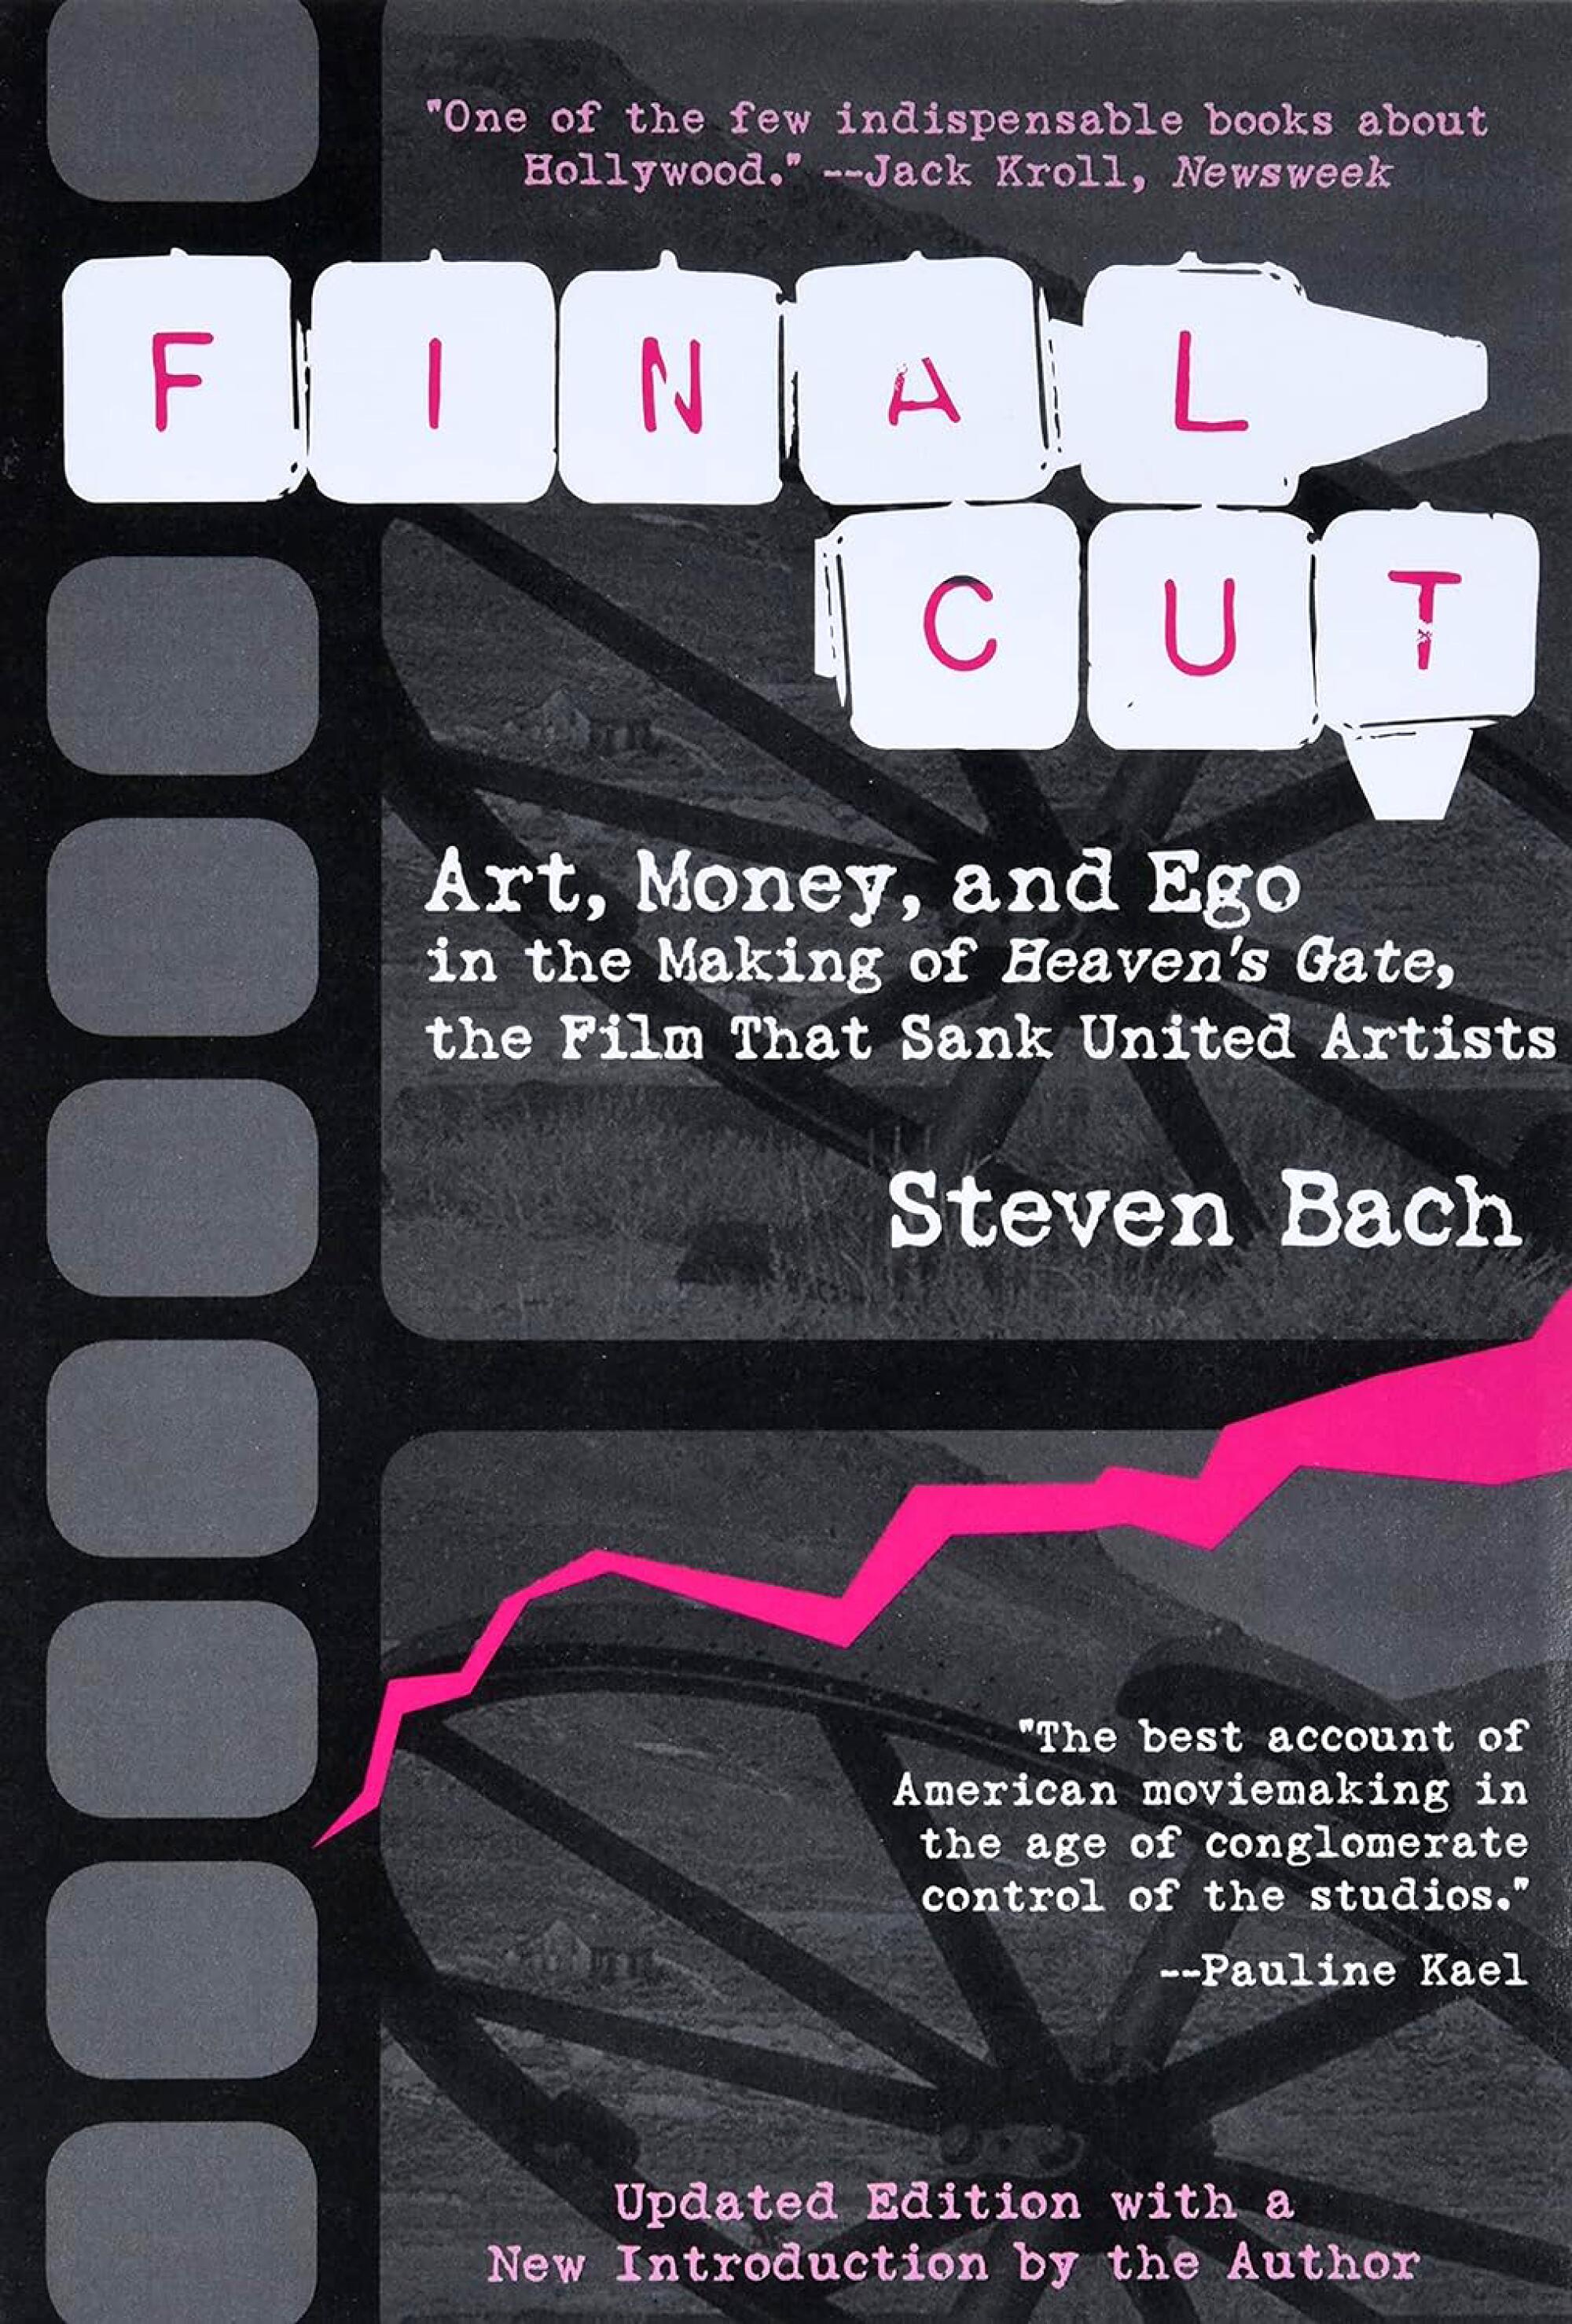 "Final Cut: Art, Money, and Ego in the Making of Heaven's Gate, the Film that Sank United Artists" by Steven Bach